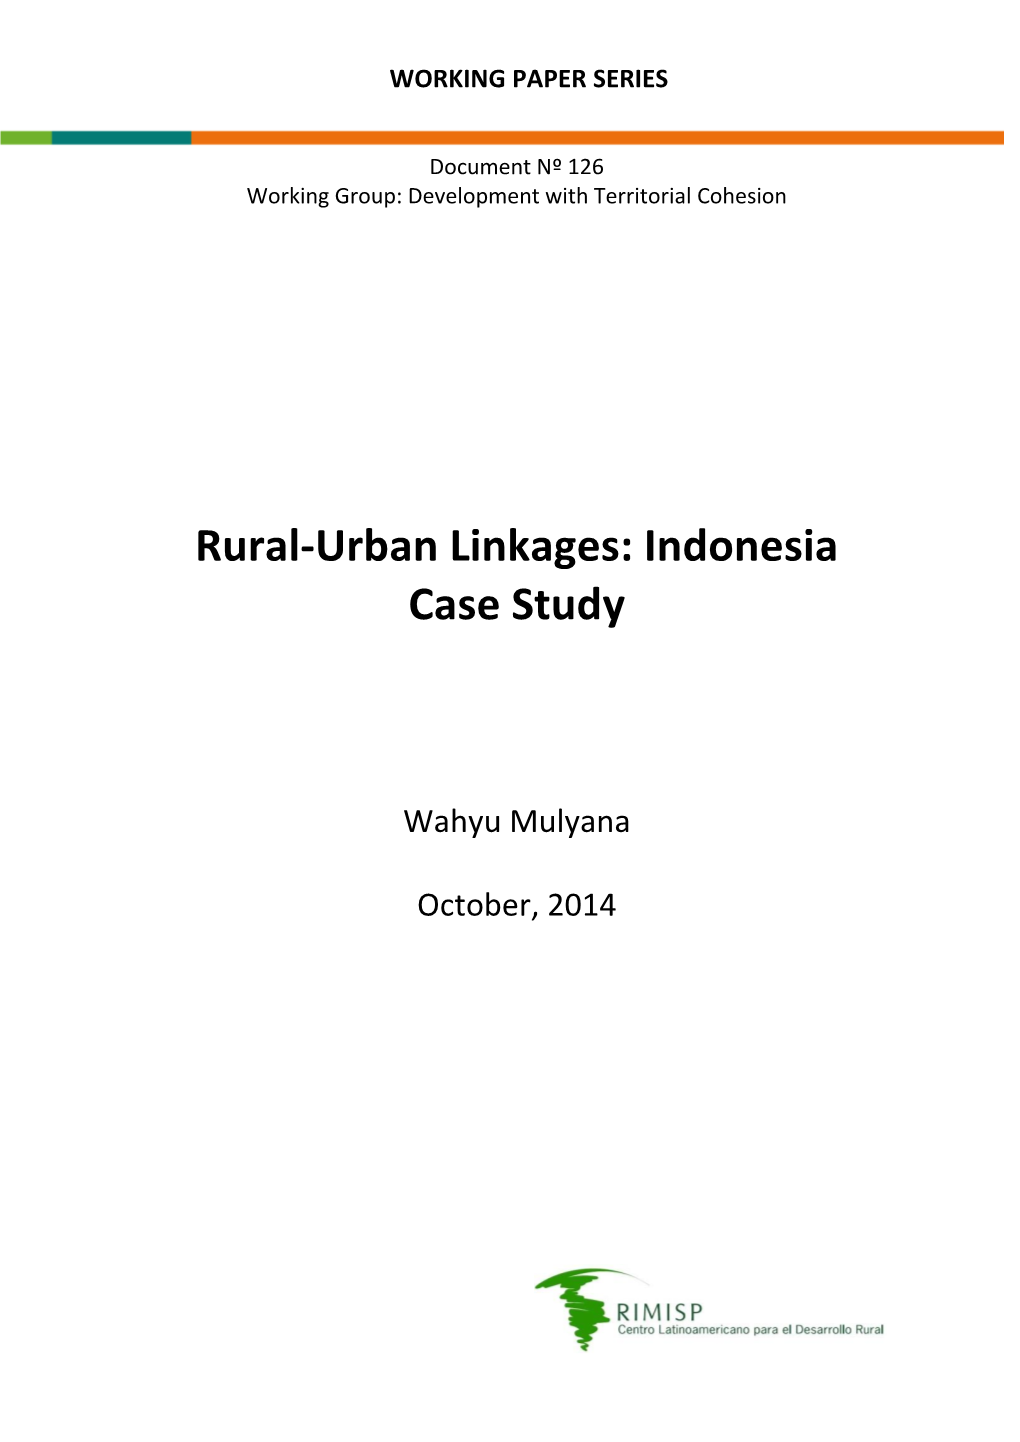 Rural-Urban Linkages: Indonesia Case Study